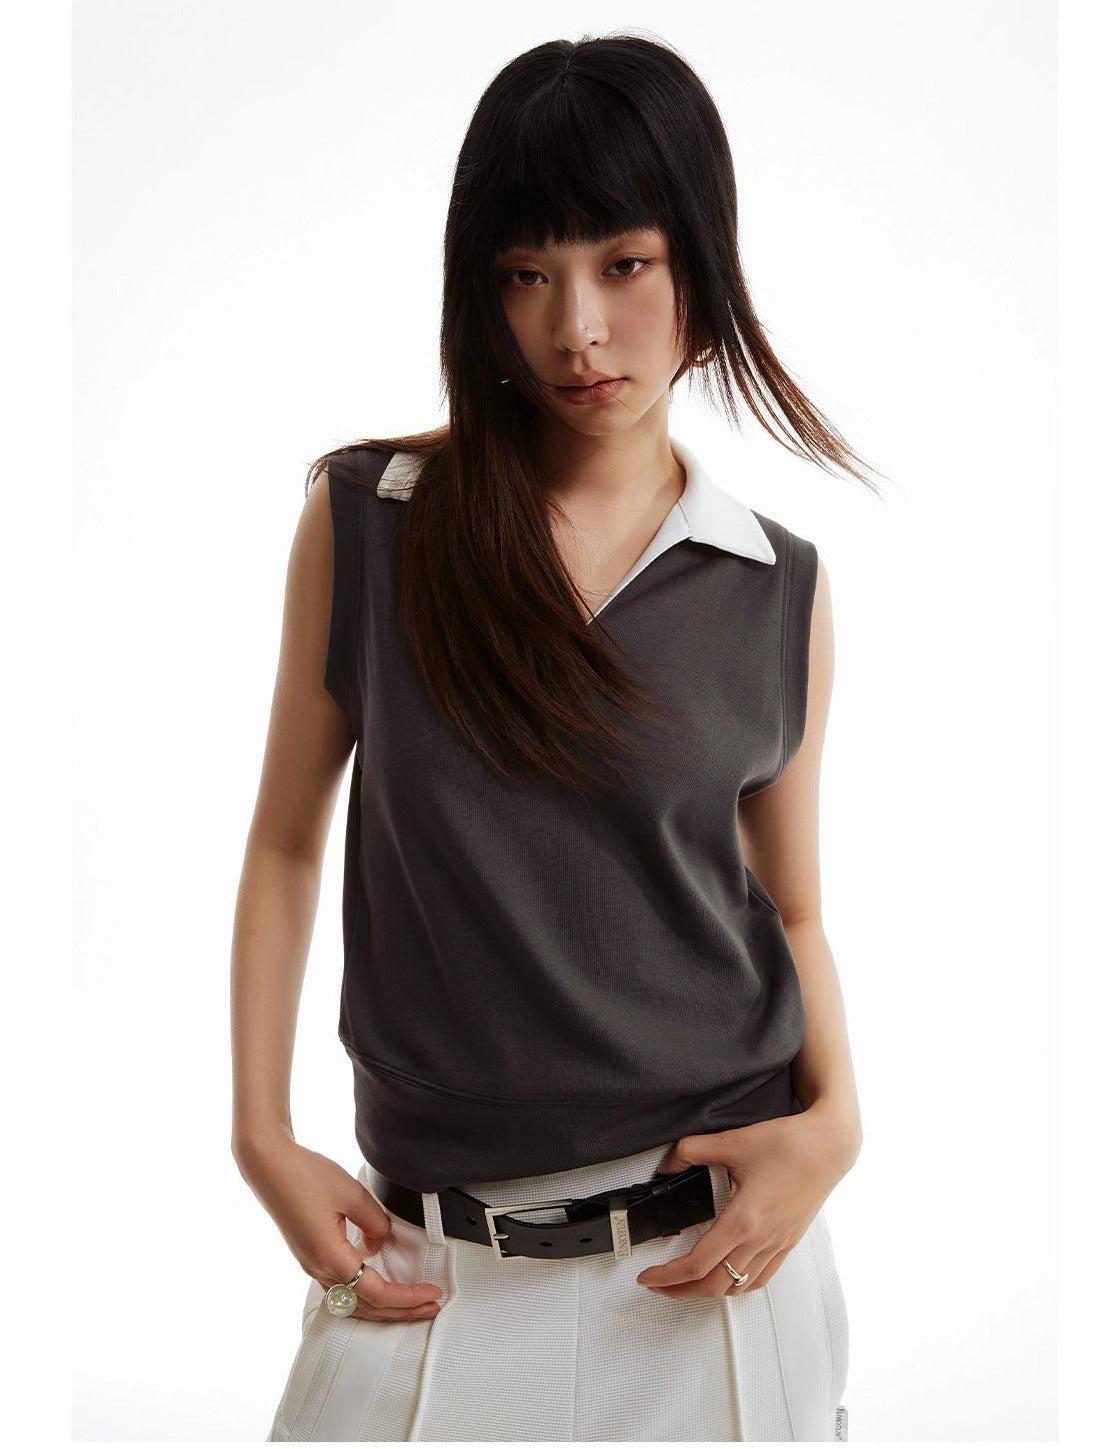 Contrast Collared Vest Polo Korean Street Fashion Polo By Funky Fun Shop Online at OH Vault